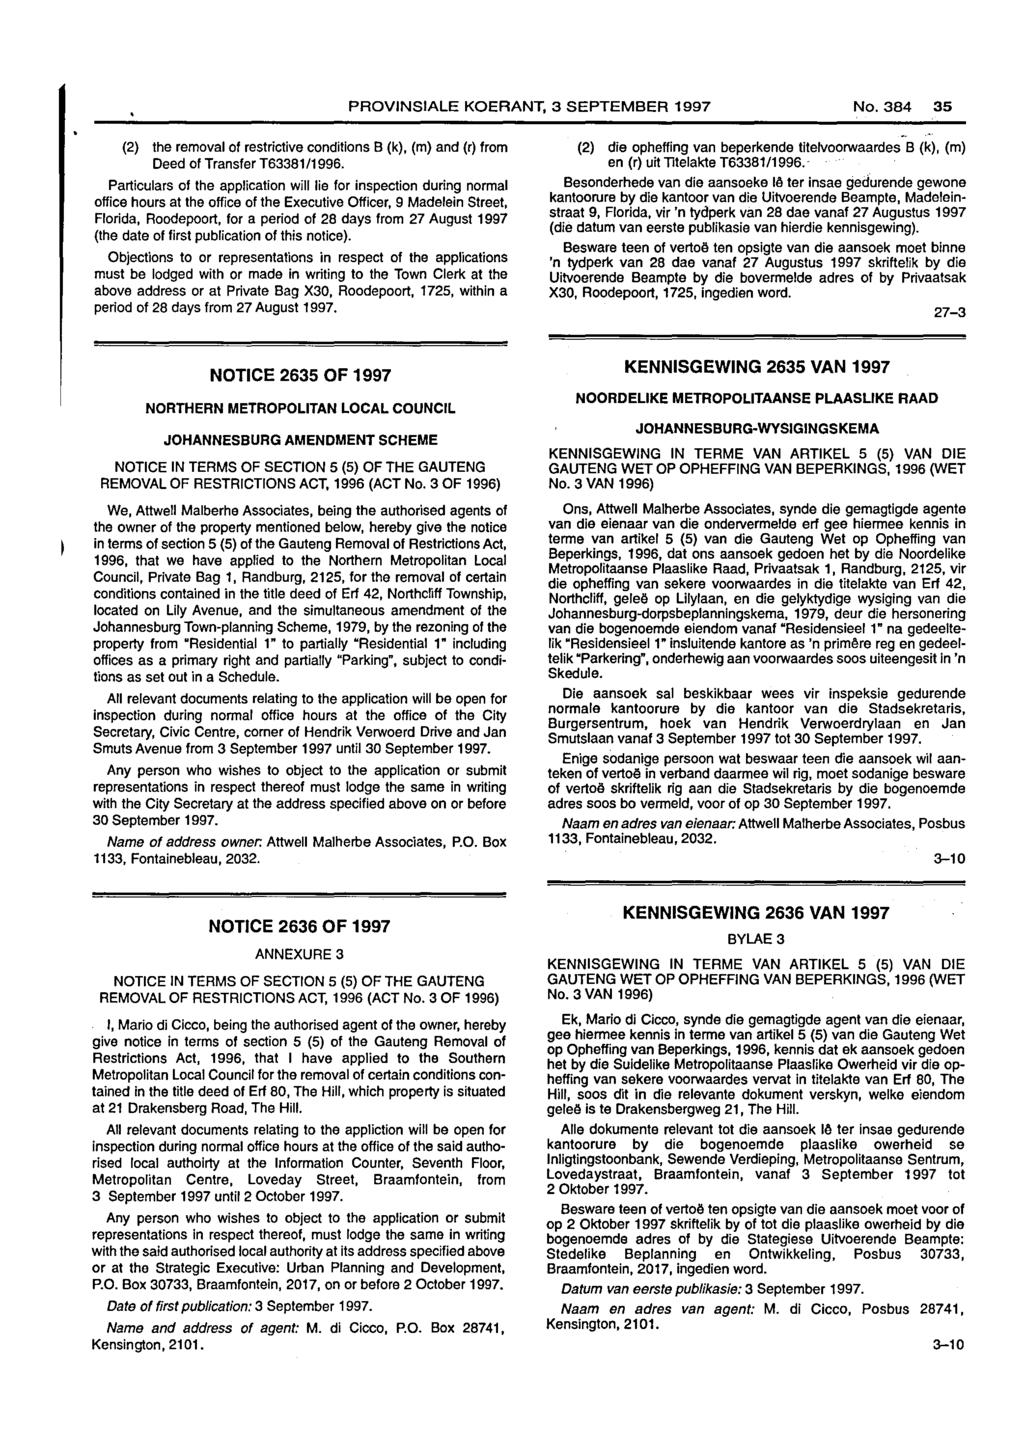 PROVINSIALE KOERANT, 3 SEPTEMBER 1997 No. 35 (2) the removal of restrictive conditions B (k), (m) and (r) from Deed of Transfer T63381/1996.